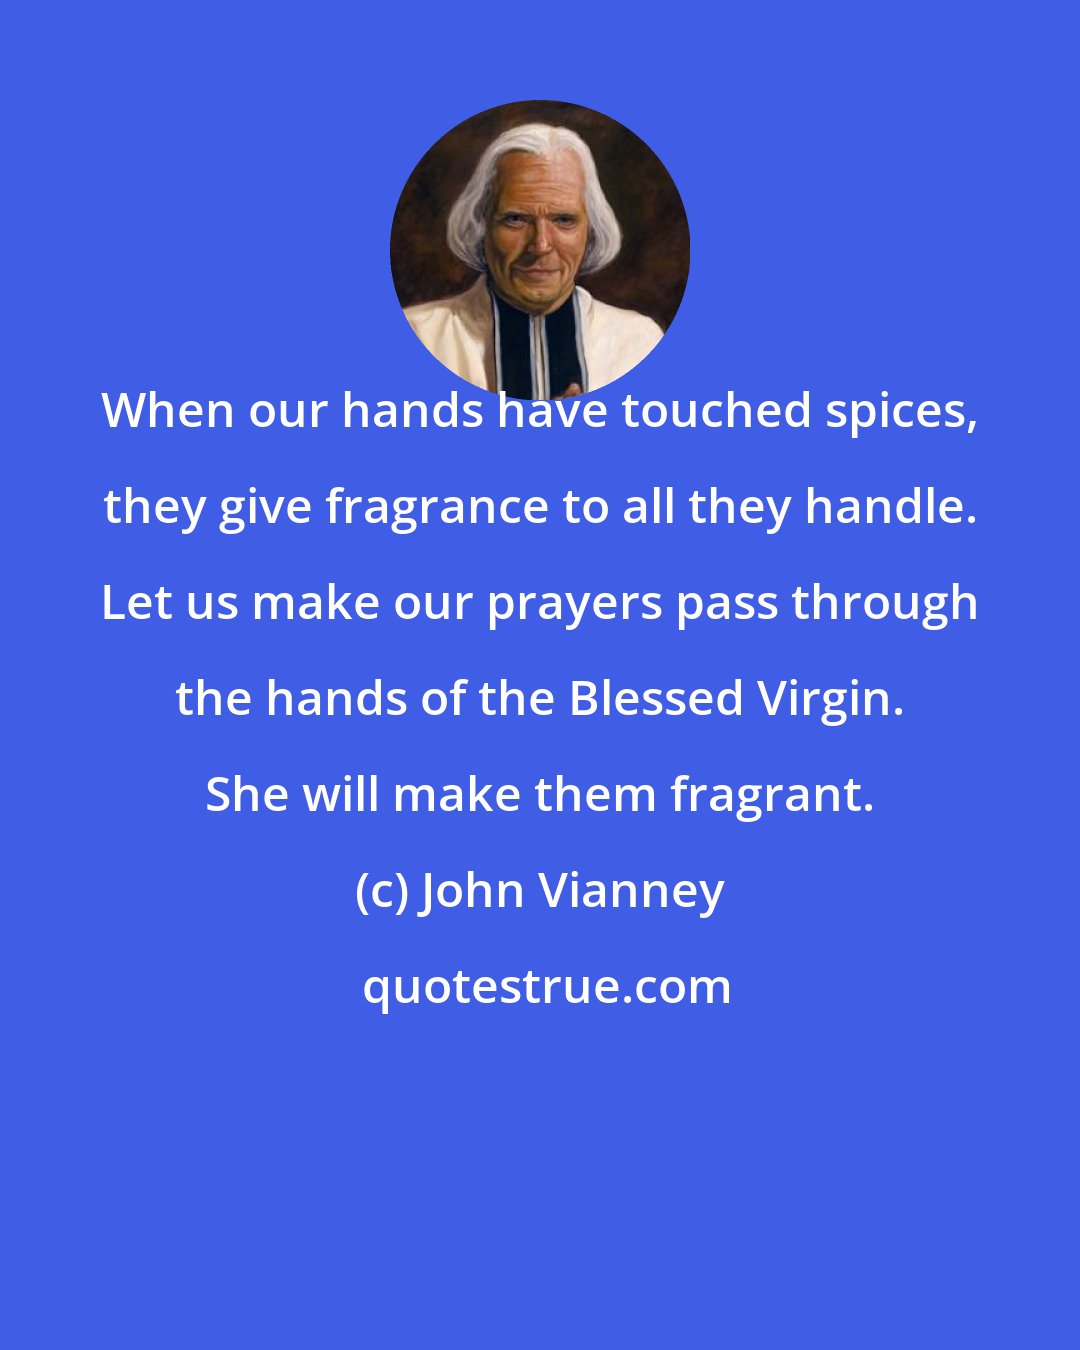 John Vianney: When our hands have touched spices, they give fragrance to all they handle. Let us make our prayers pass through the hands of the Blessed Virgin. She will make them fragrant.